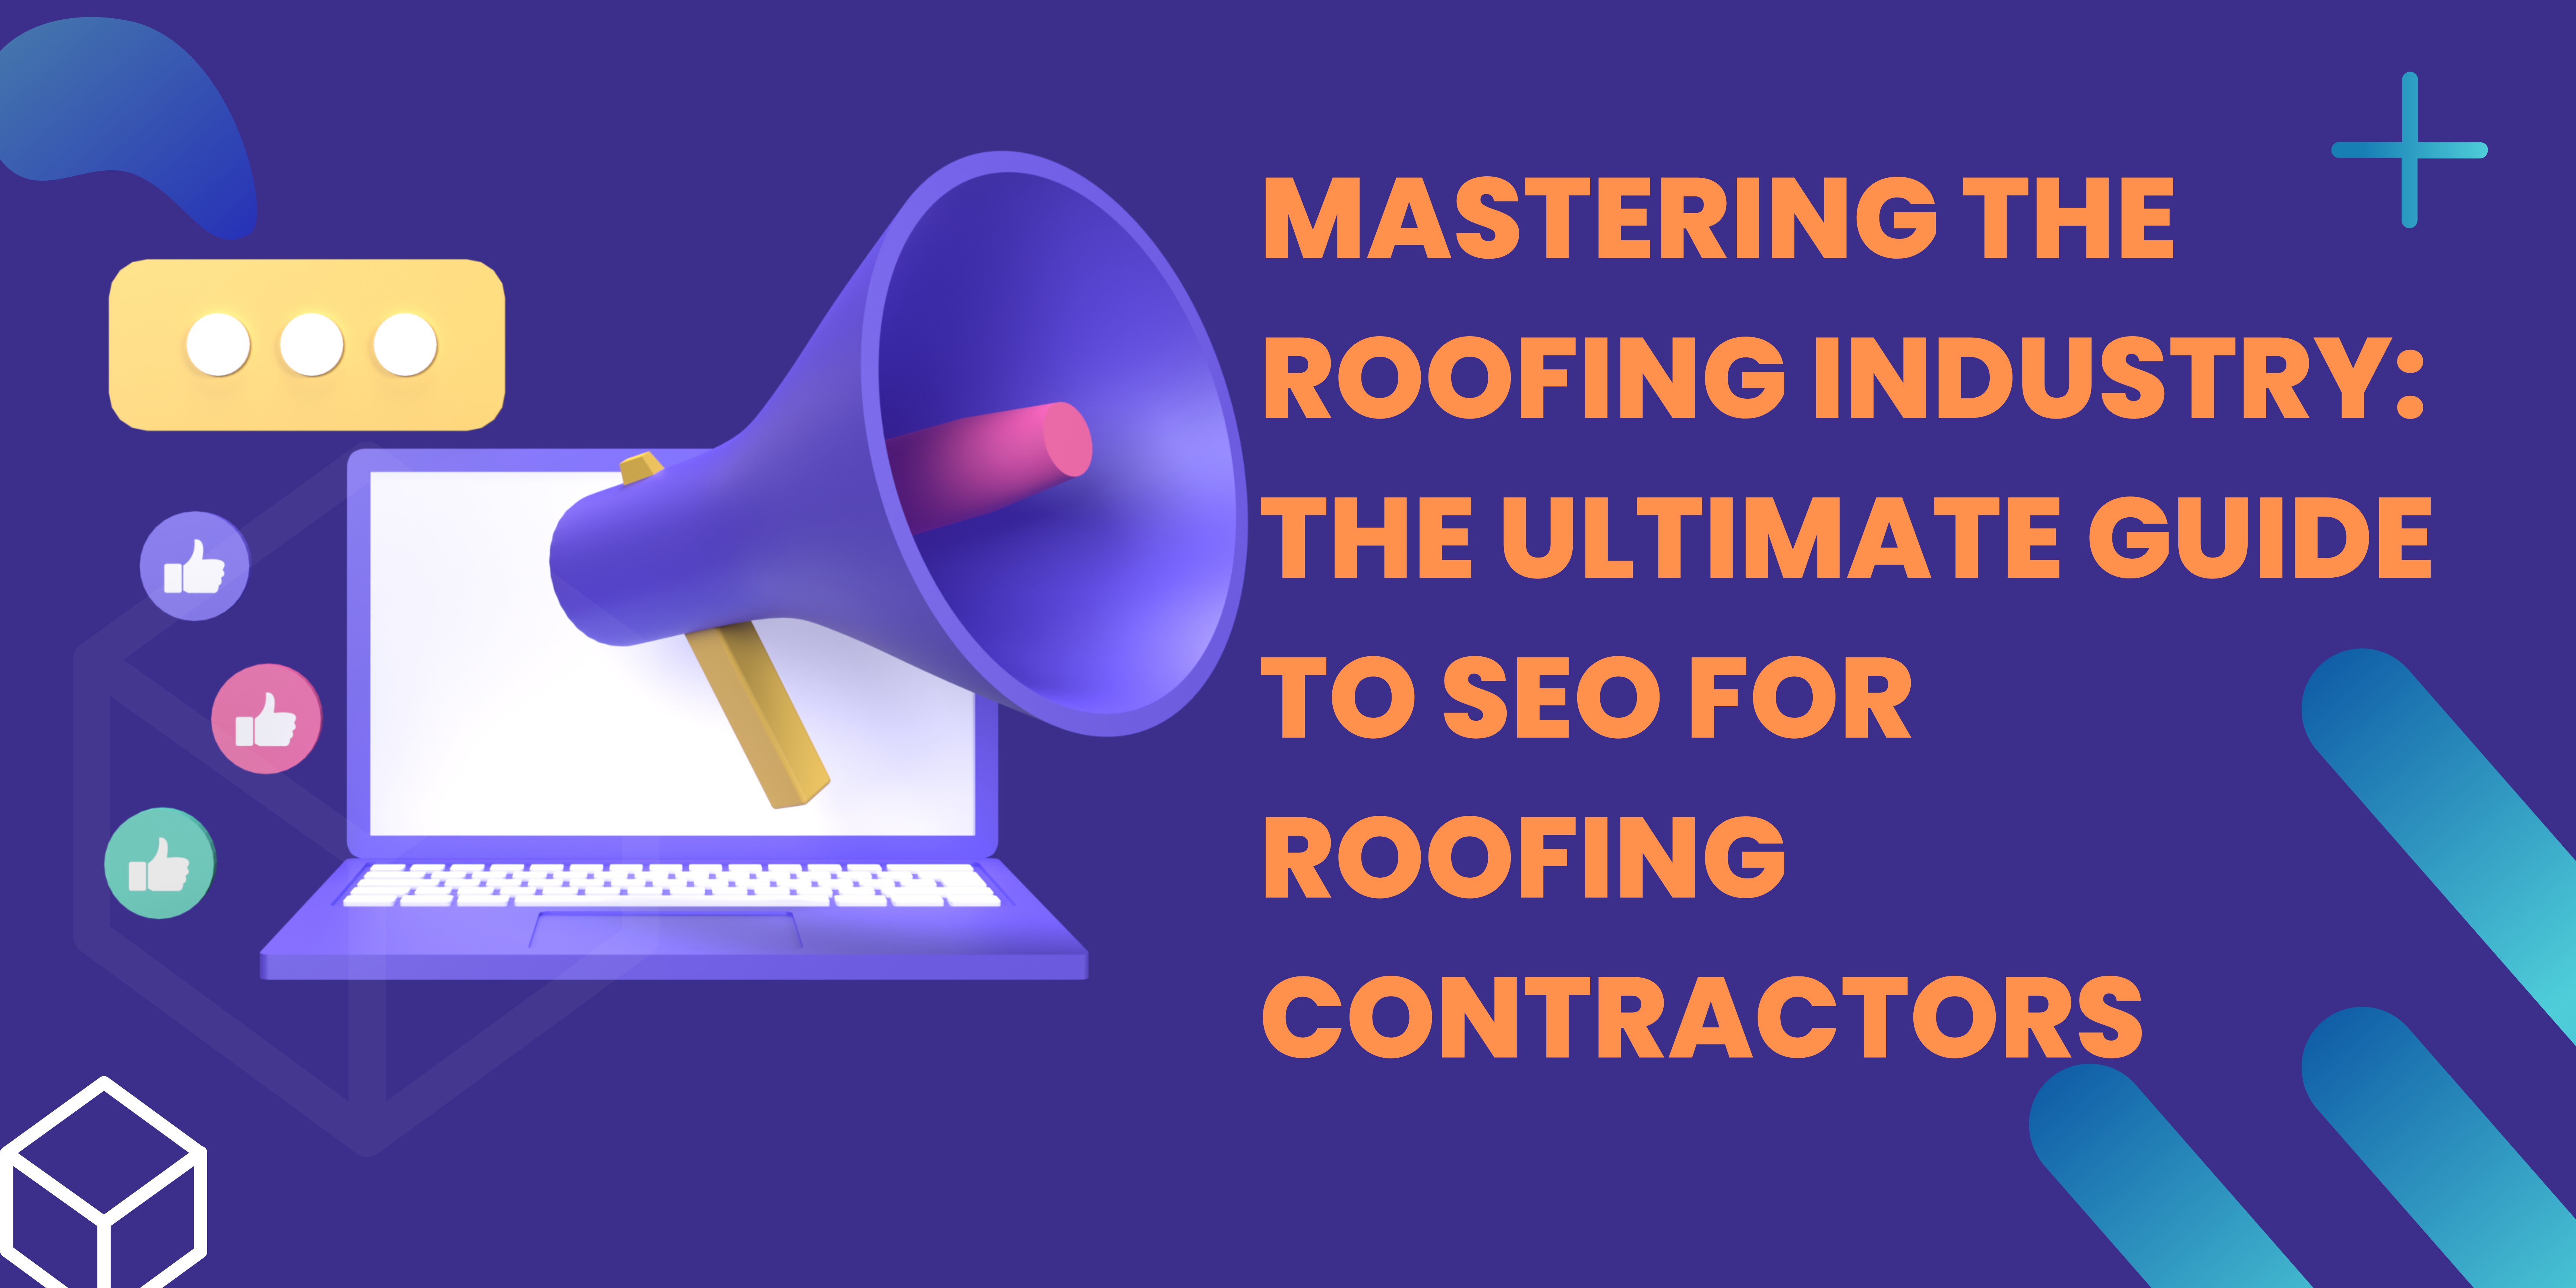 Mastering the Roofing Industry: The Ultimate Guide to SEO for Roofing Contractors